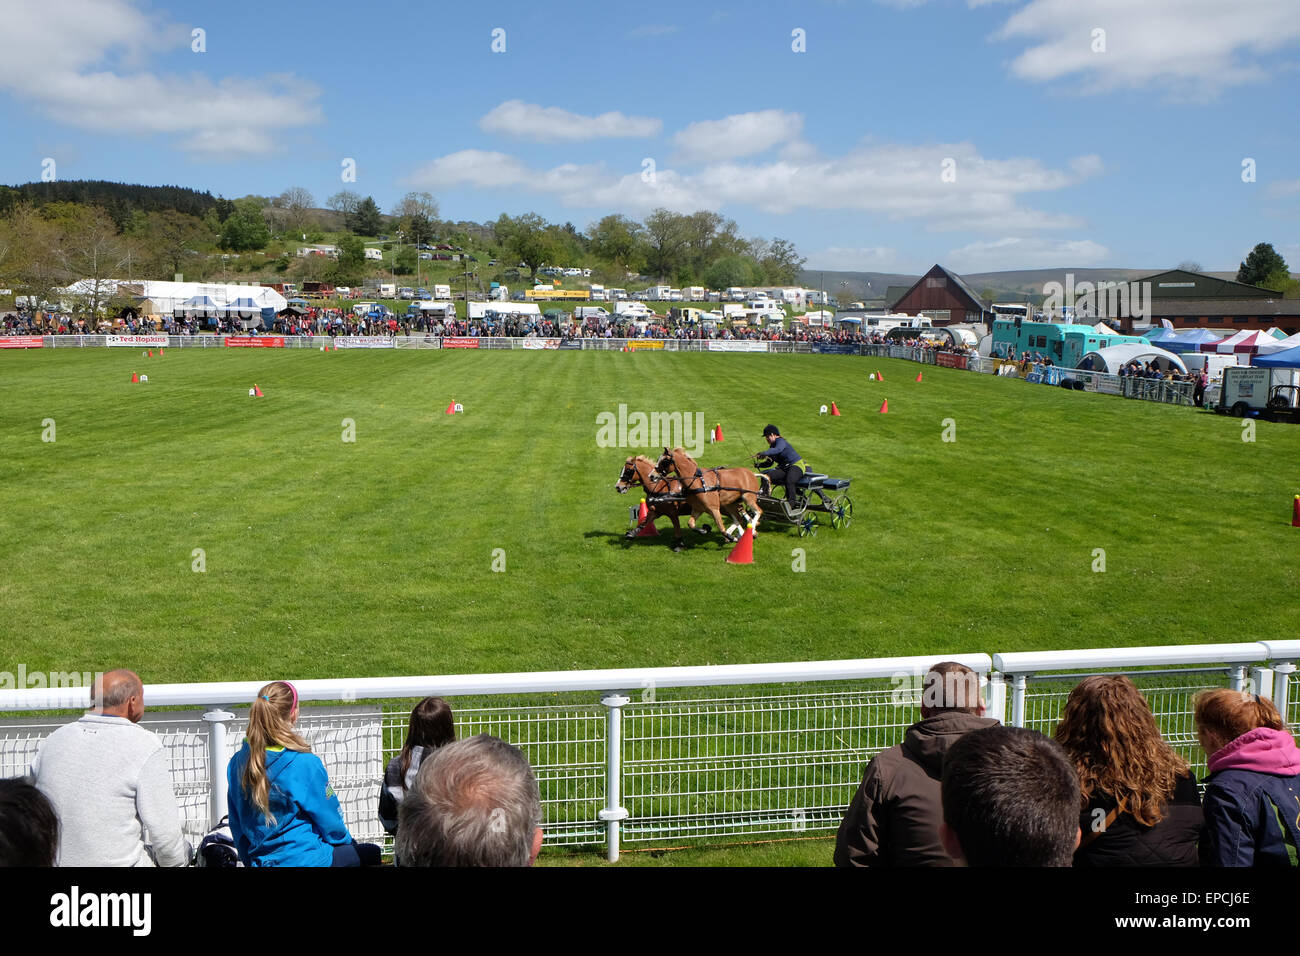 Royal Welsh Spring Festival Builth Wells, Powys, Wales, UK May, 2015. Day 1 of the festival included the preliminary rounds of the Scurry Driving competition with teams of two racing around the outdoor showground in the afternoon sunshine. Stock Photo